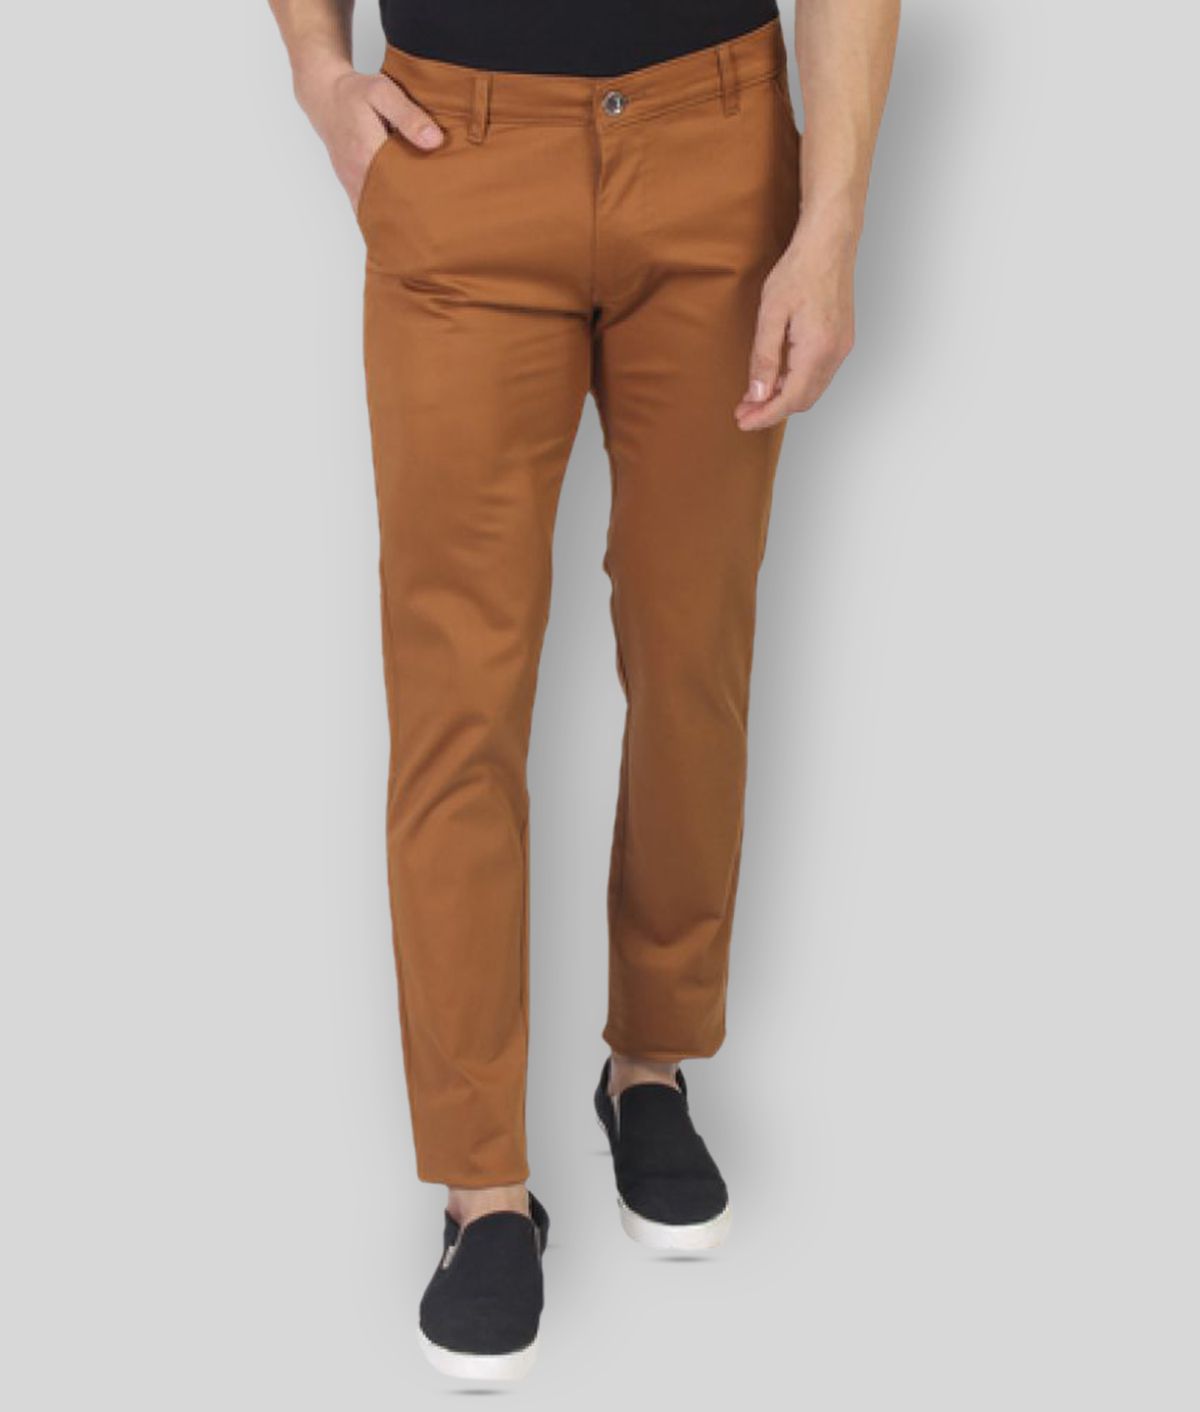 Fluidic - Gold Cotton Blend Regular Fit  Chinos (Pack of 1)